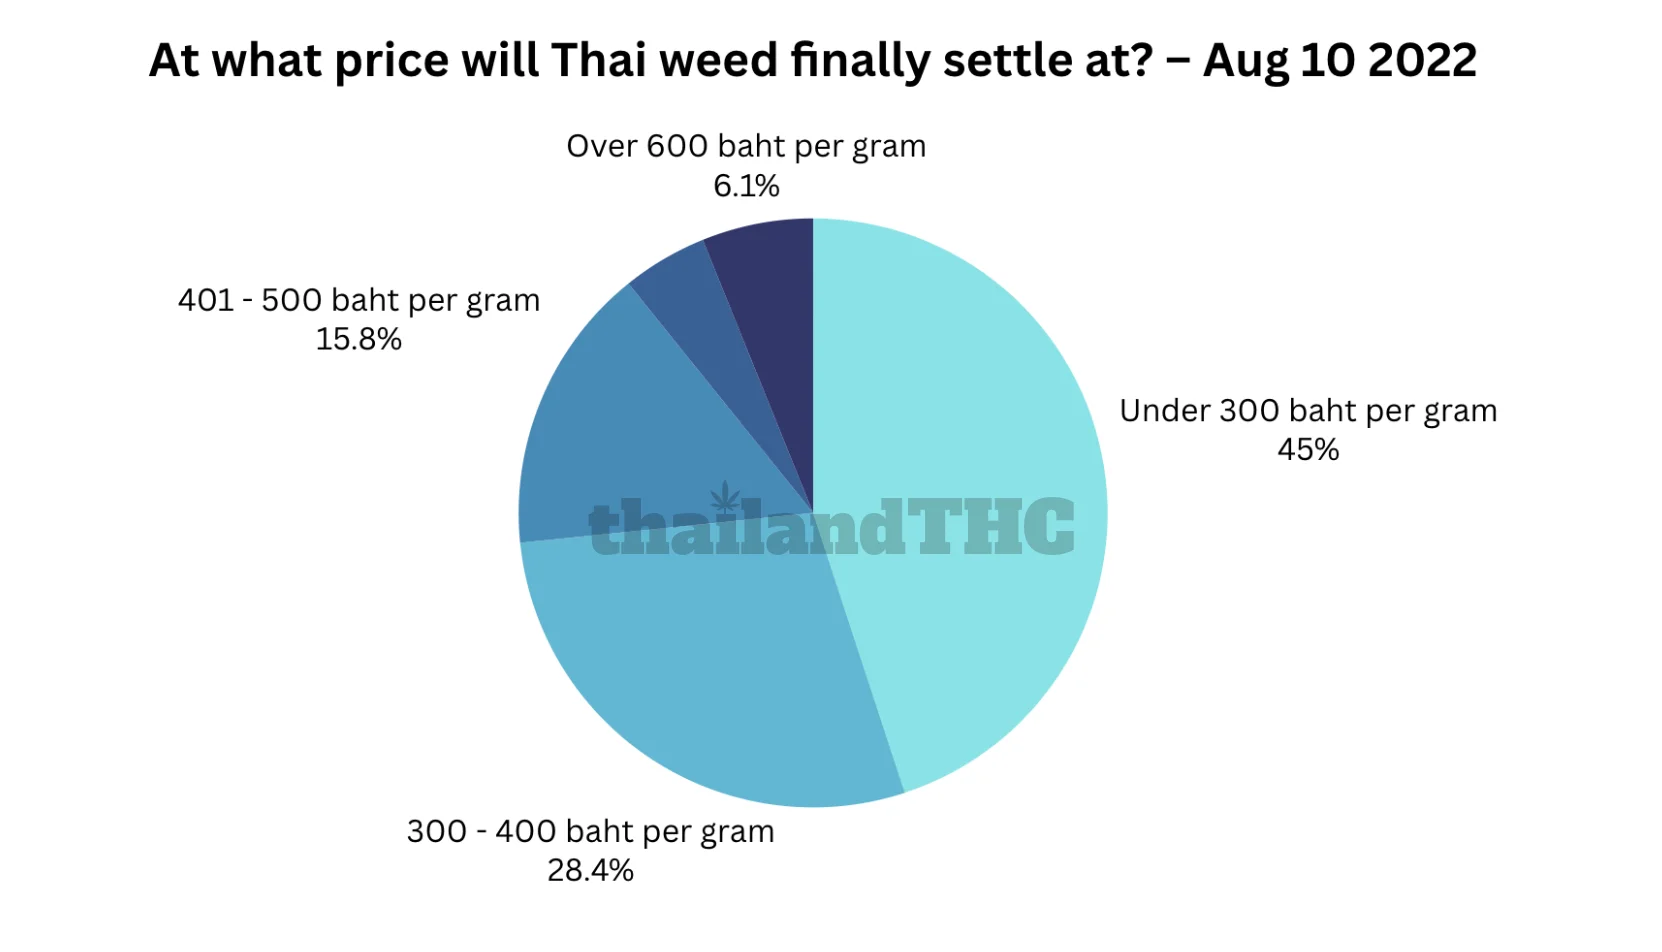 At what price will Thai weed finally settle at?